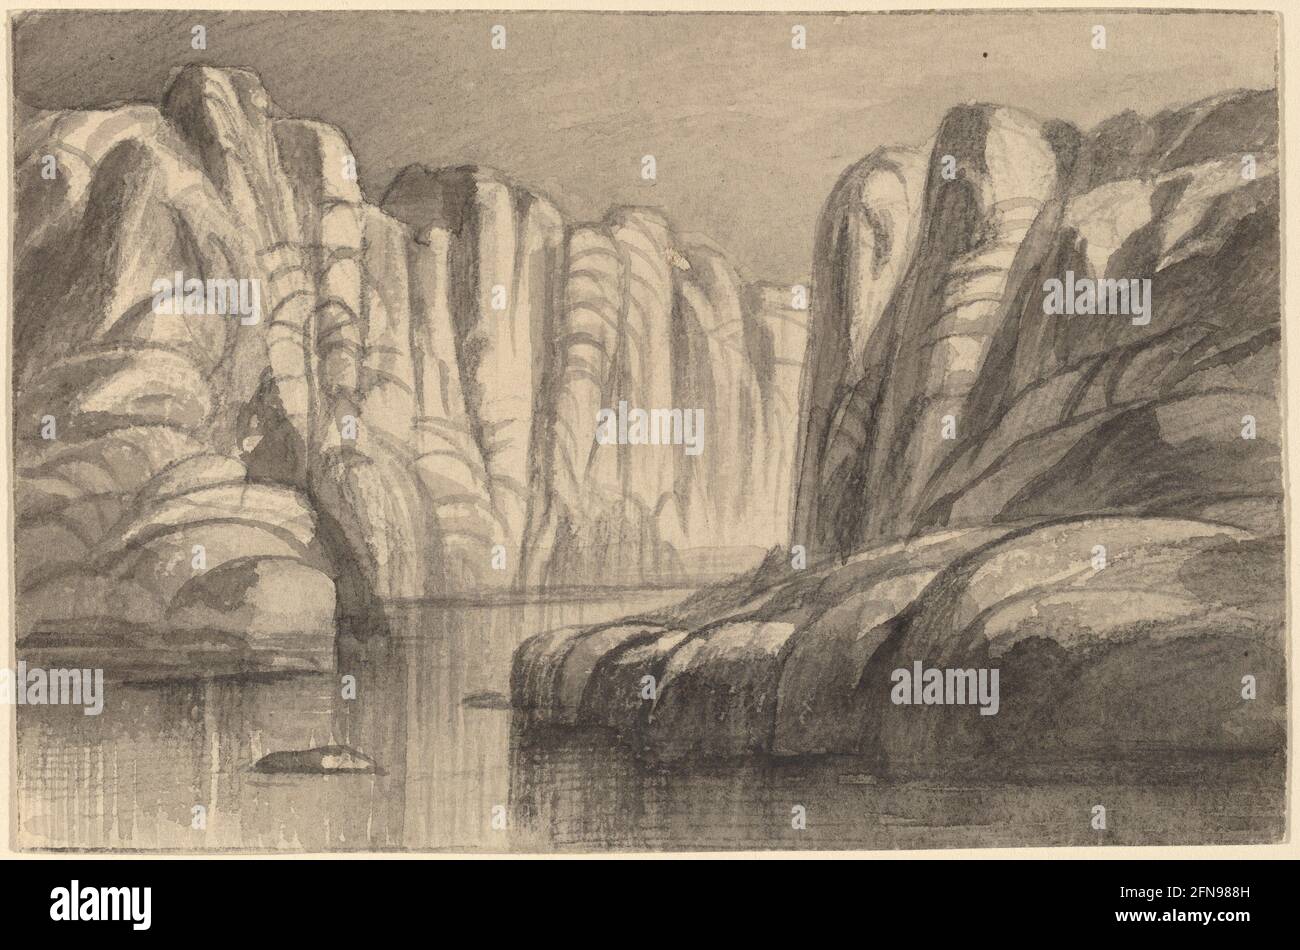 River Winding through a Rock Formation (Philae, Egypt), 1884/1885. Stock Photo